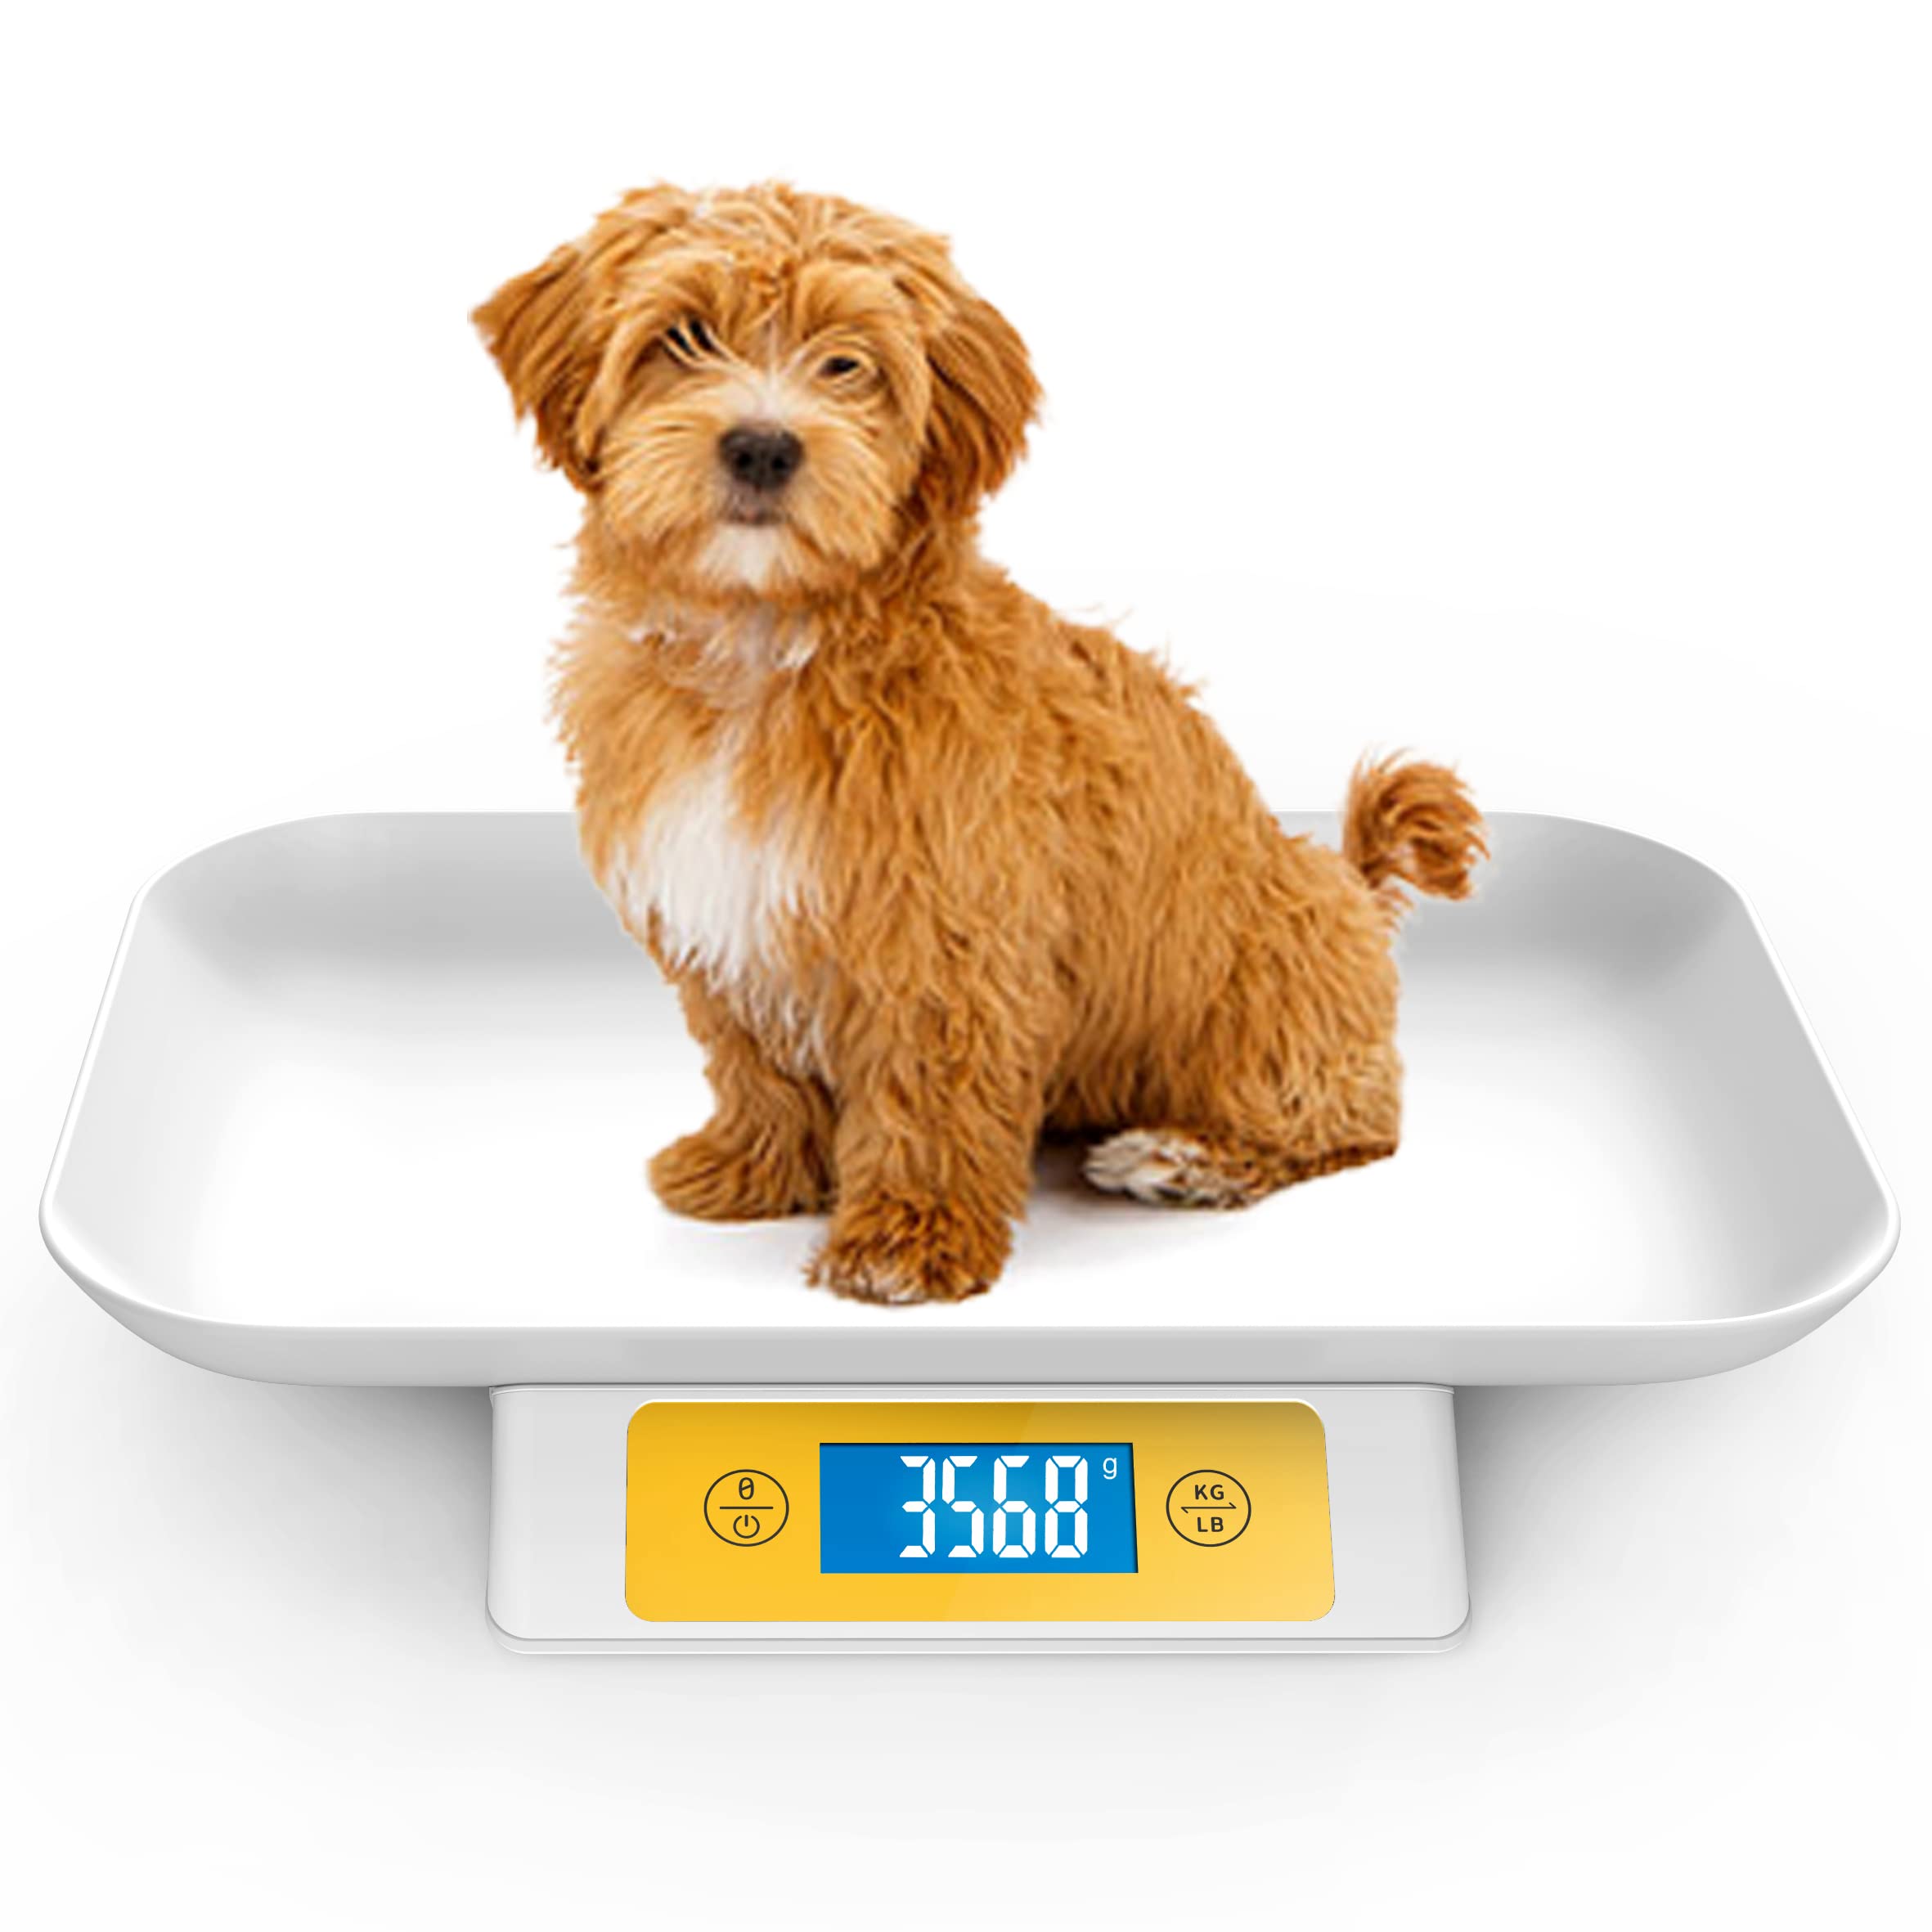 Mindpet-med MINDPET-MED Digital Pet Scale for Small Animal Whelping  ScaleMini Precision gram Weight Balance Scale High Precision A0.03ozBlue